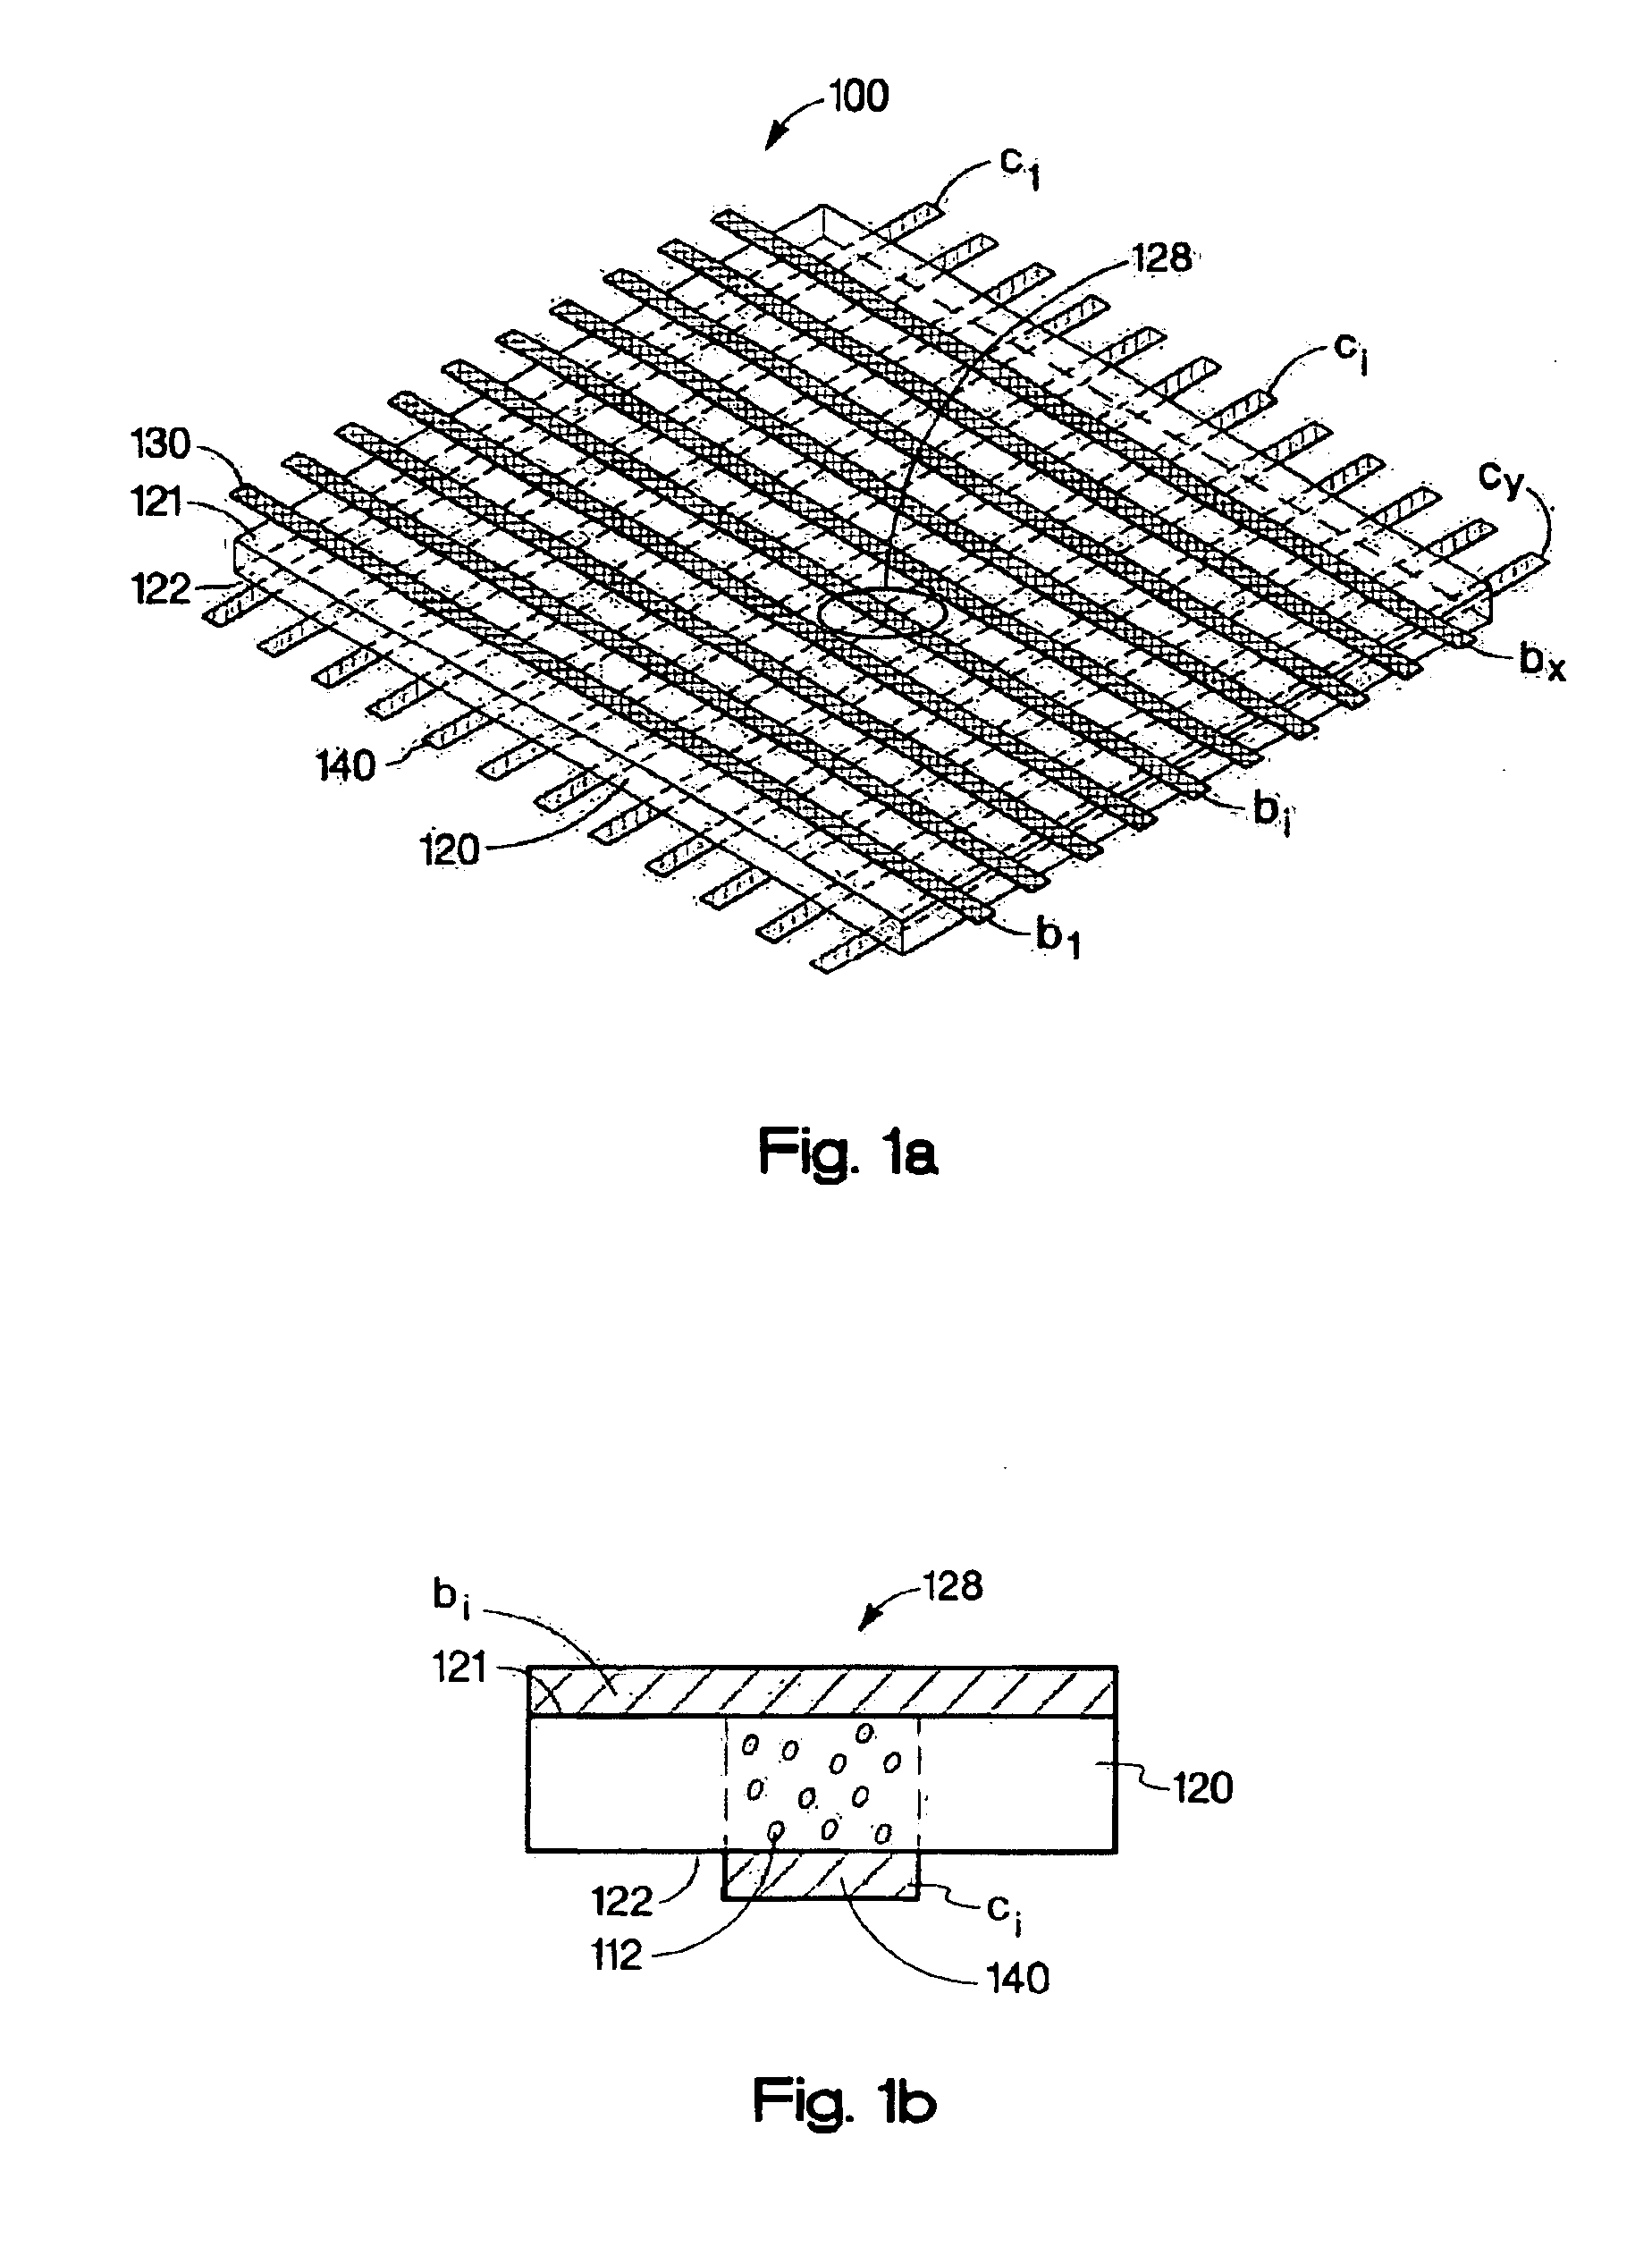 Memory device having a semiconducting polymer film